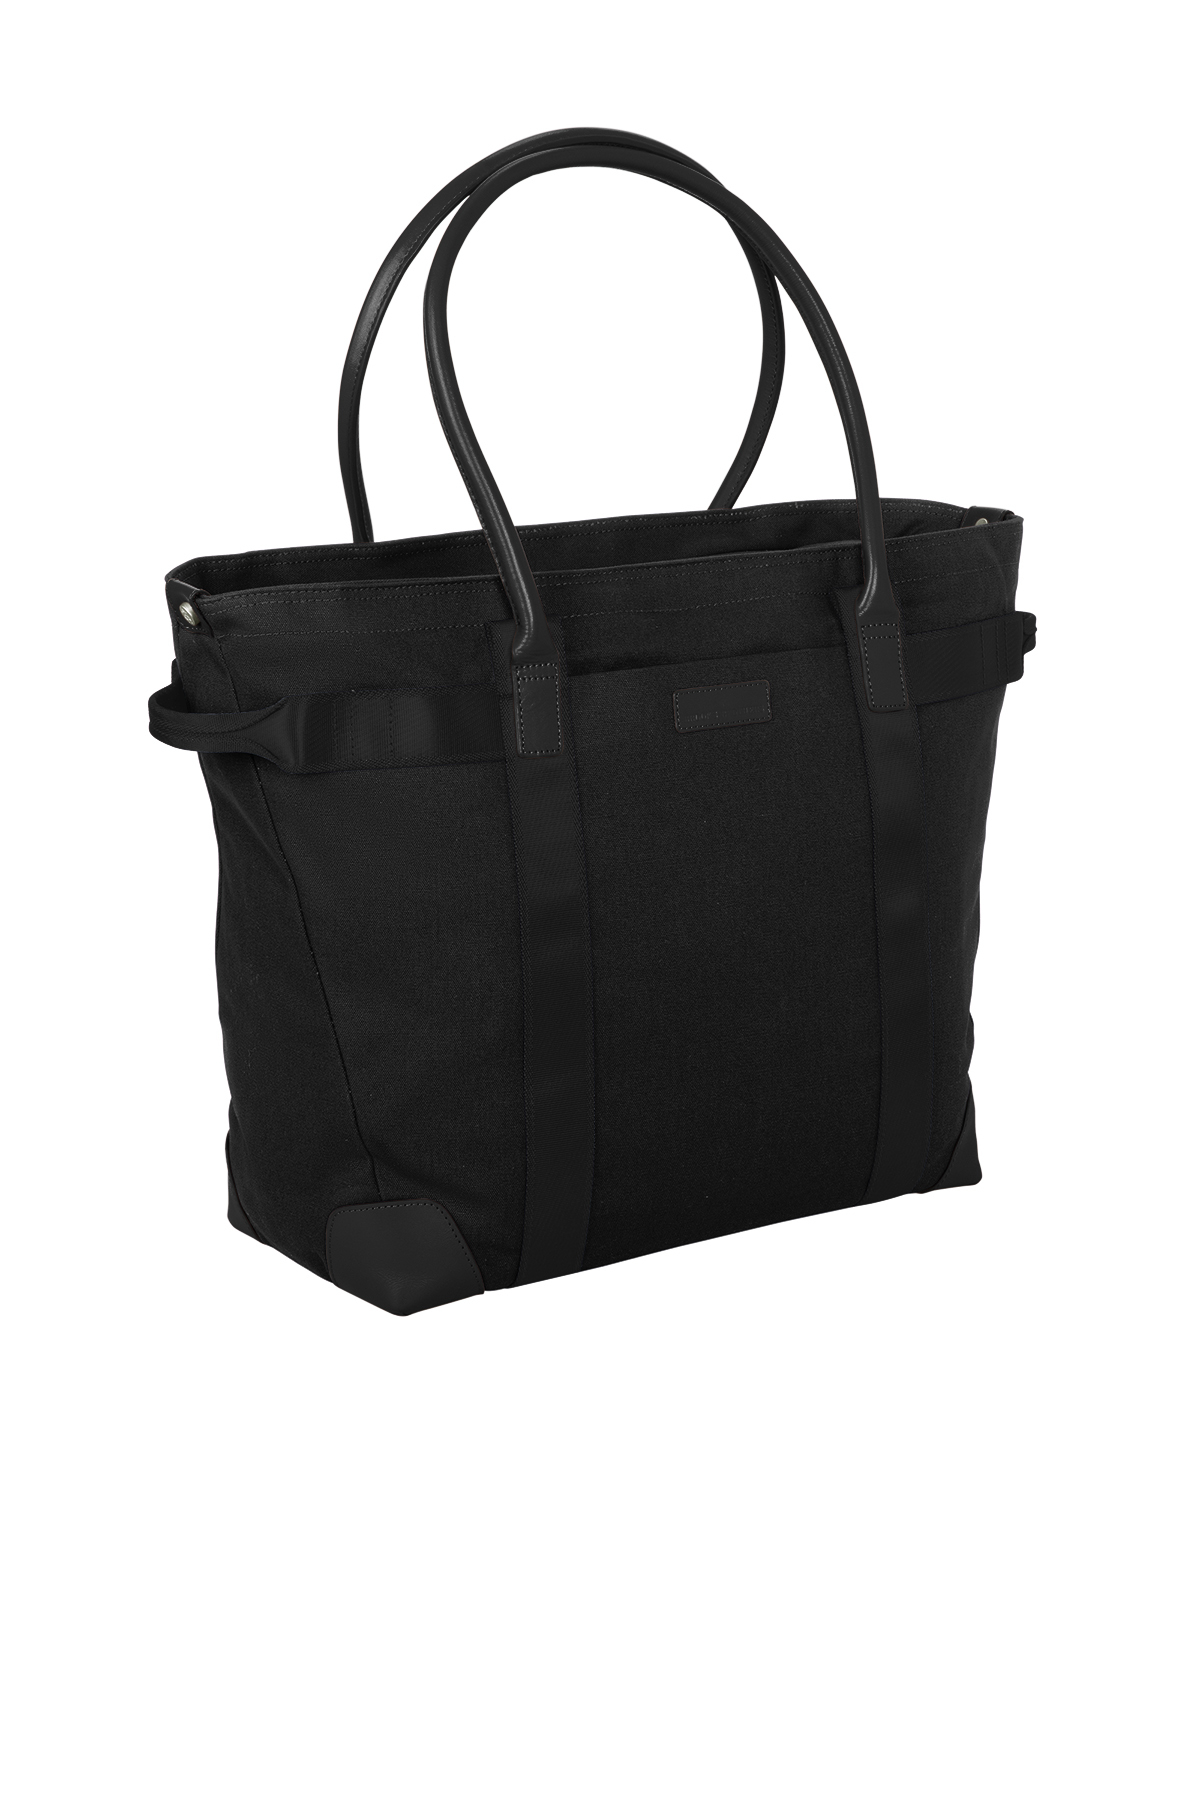 Brooks Brothers Wells Laptop Tote | Product | SanMar